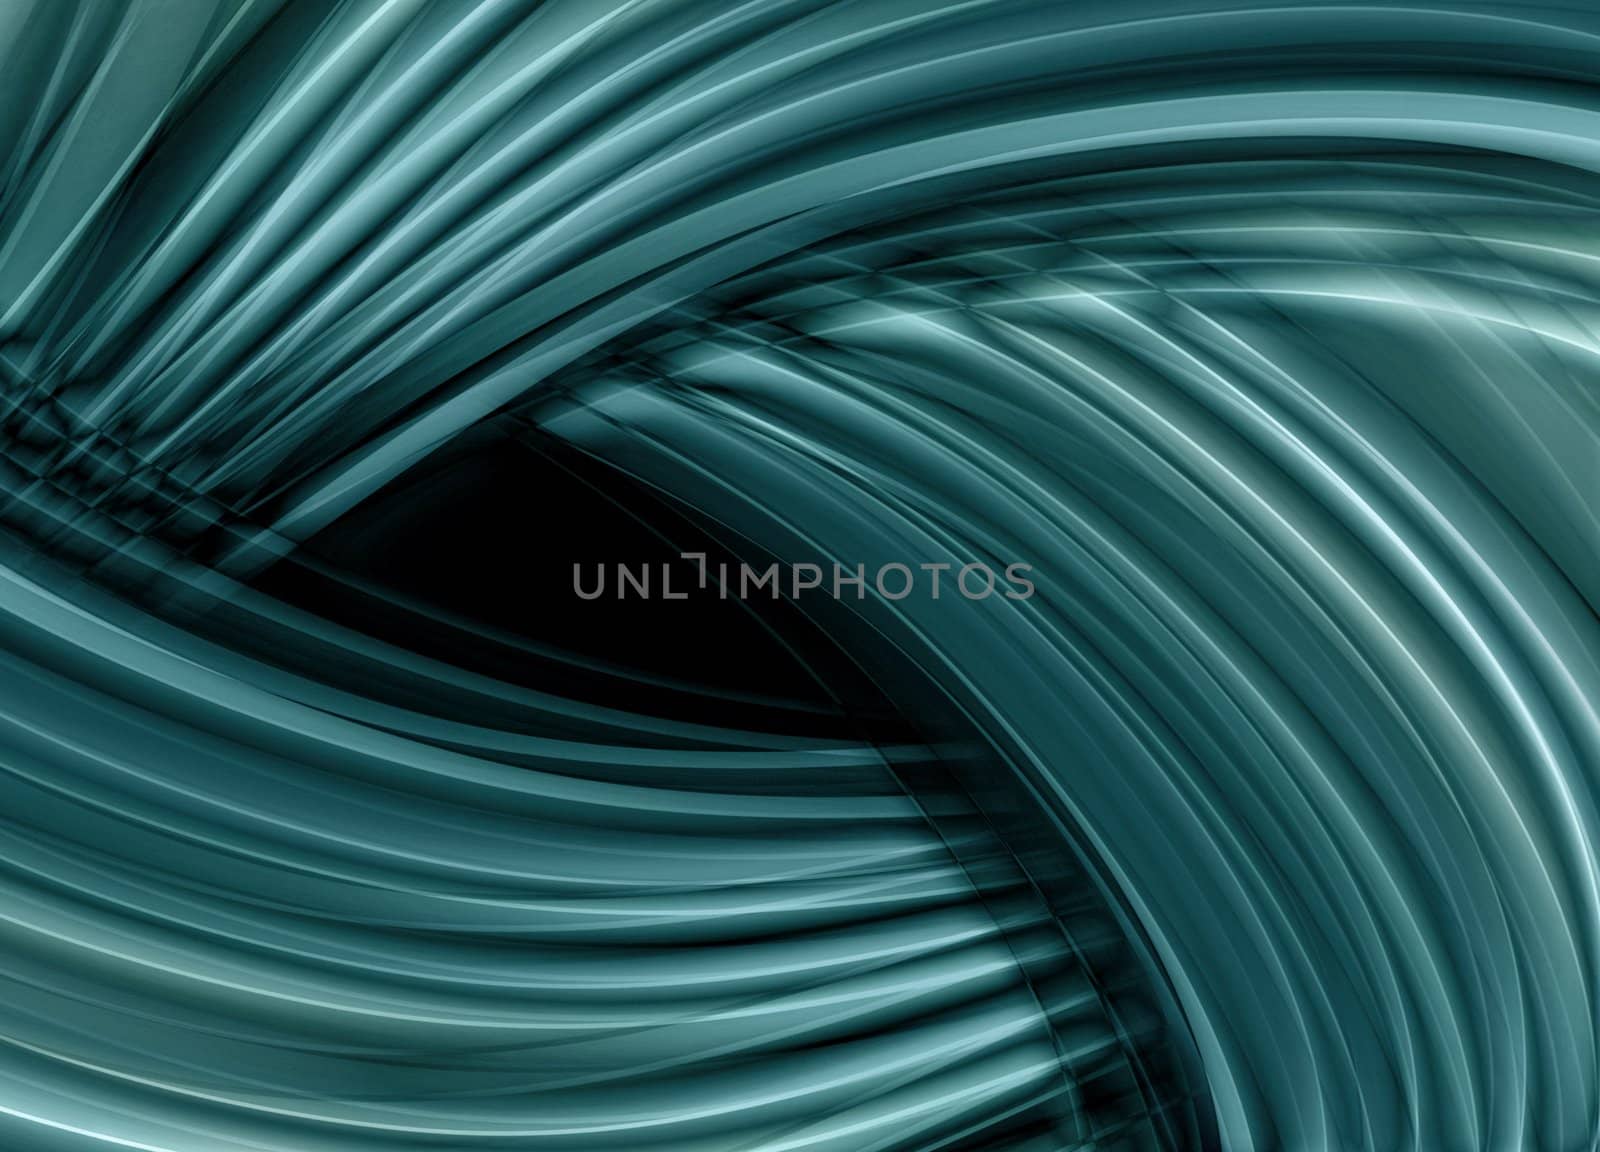 Steel blurry waves and curved lines background